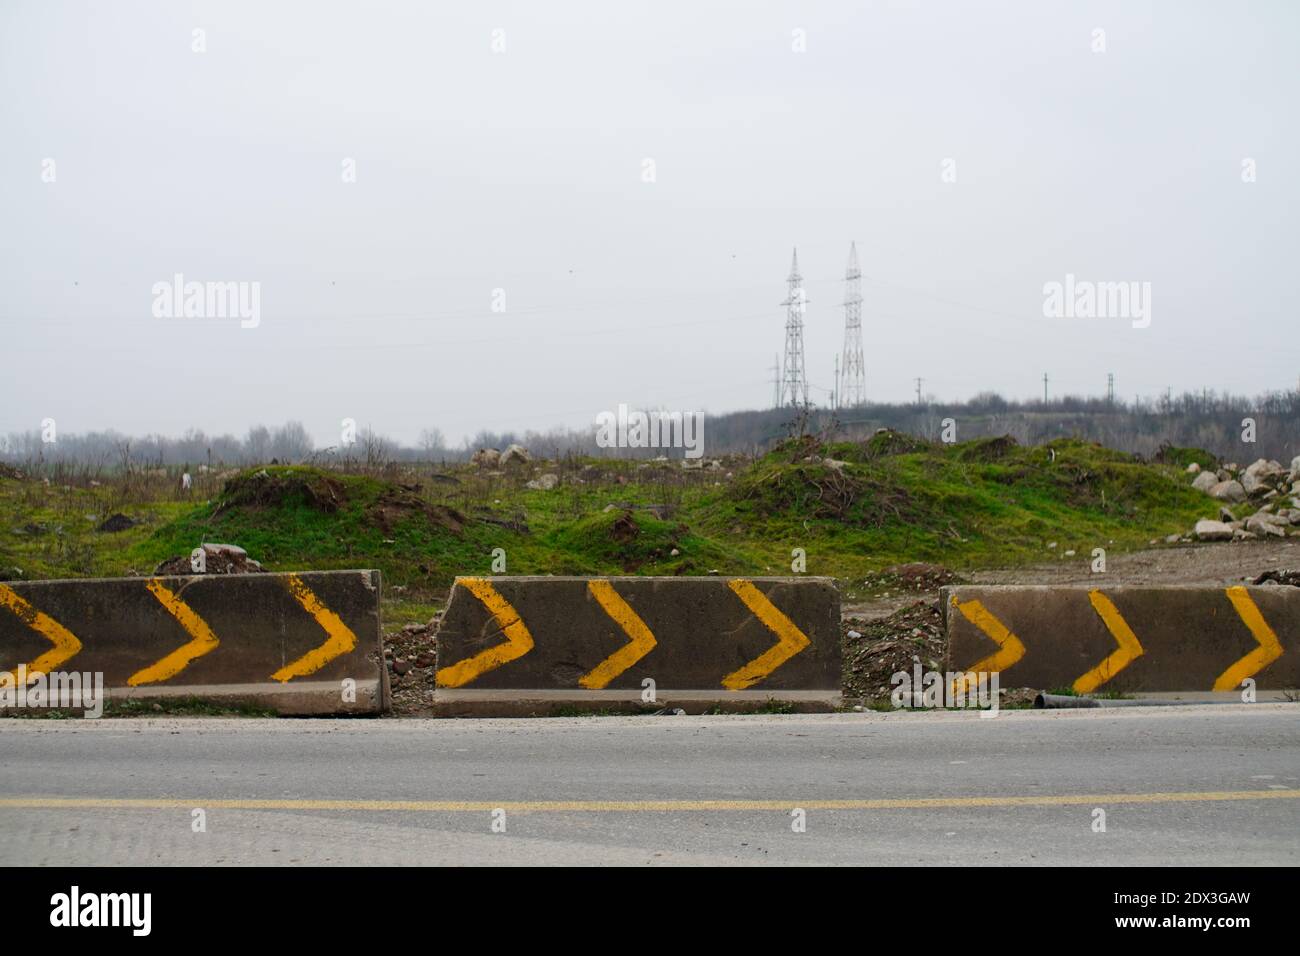 A highway lined with concrete barrier with yellow painted warning arrow sign Stock Photo